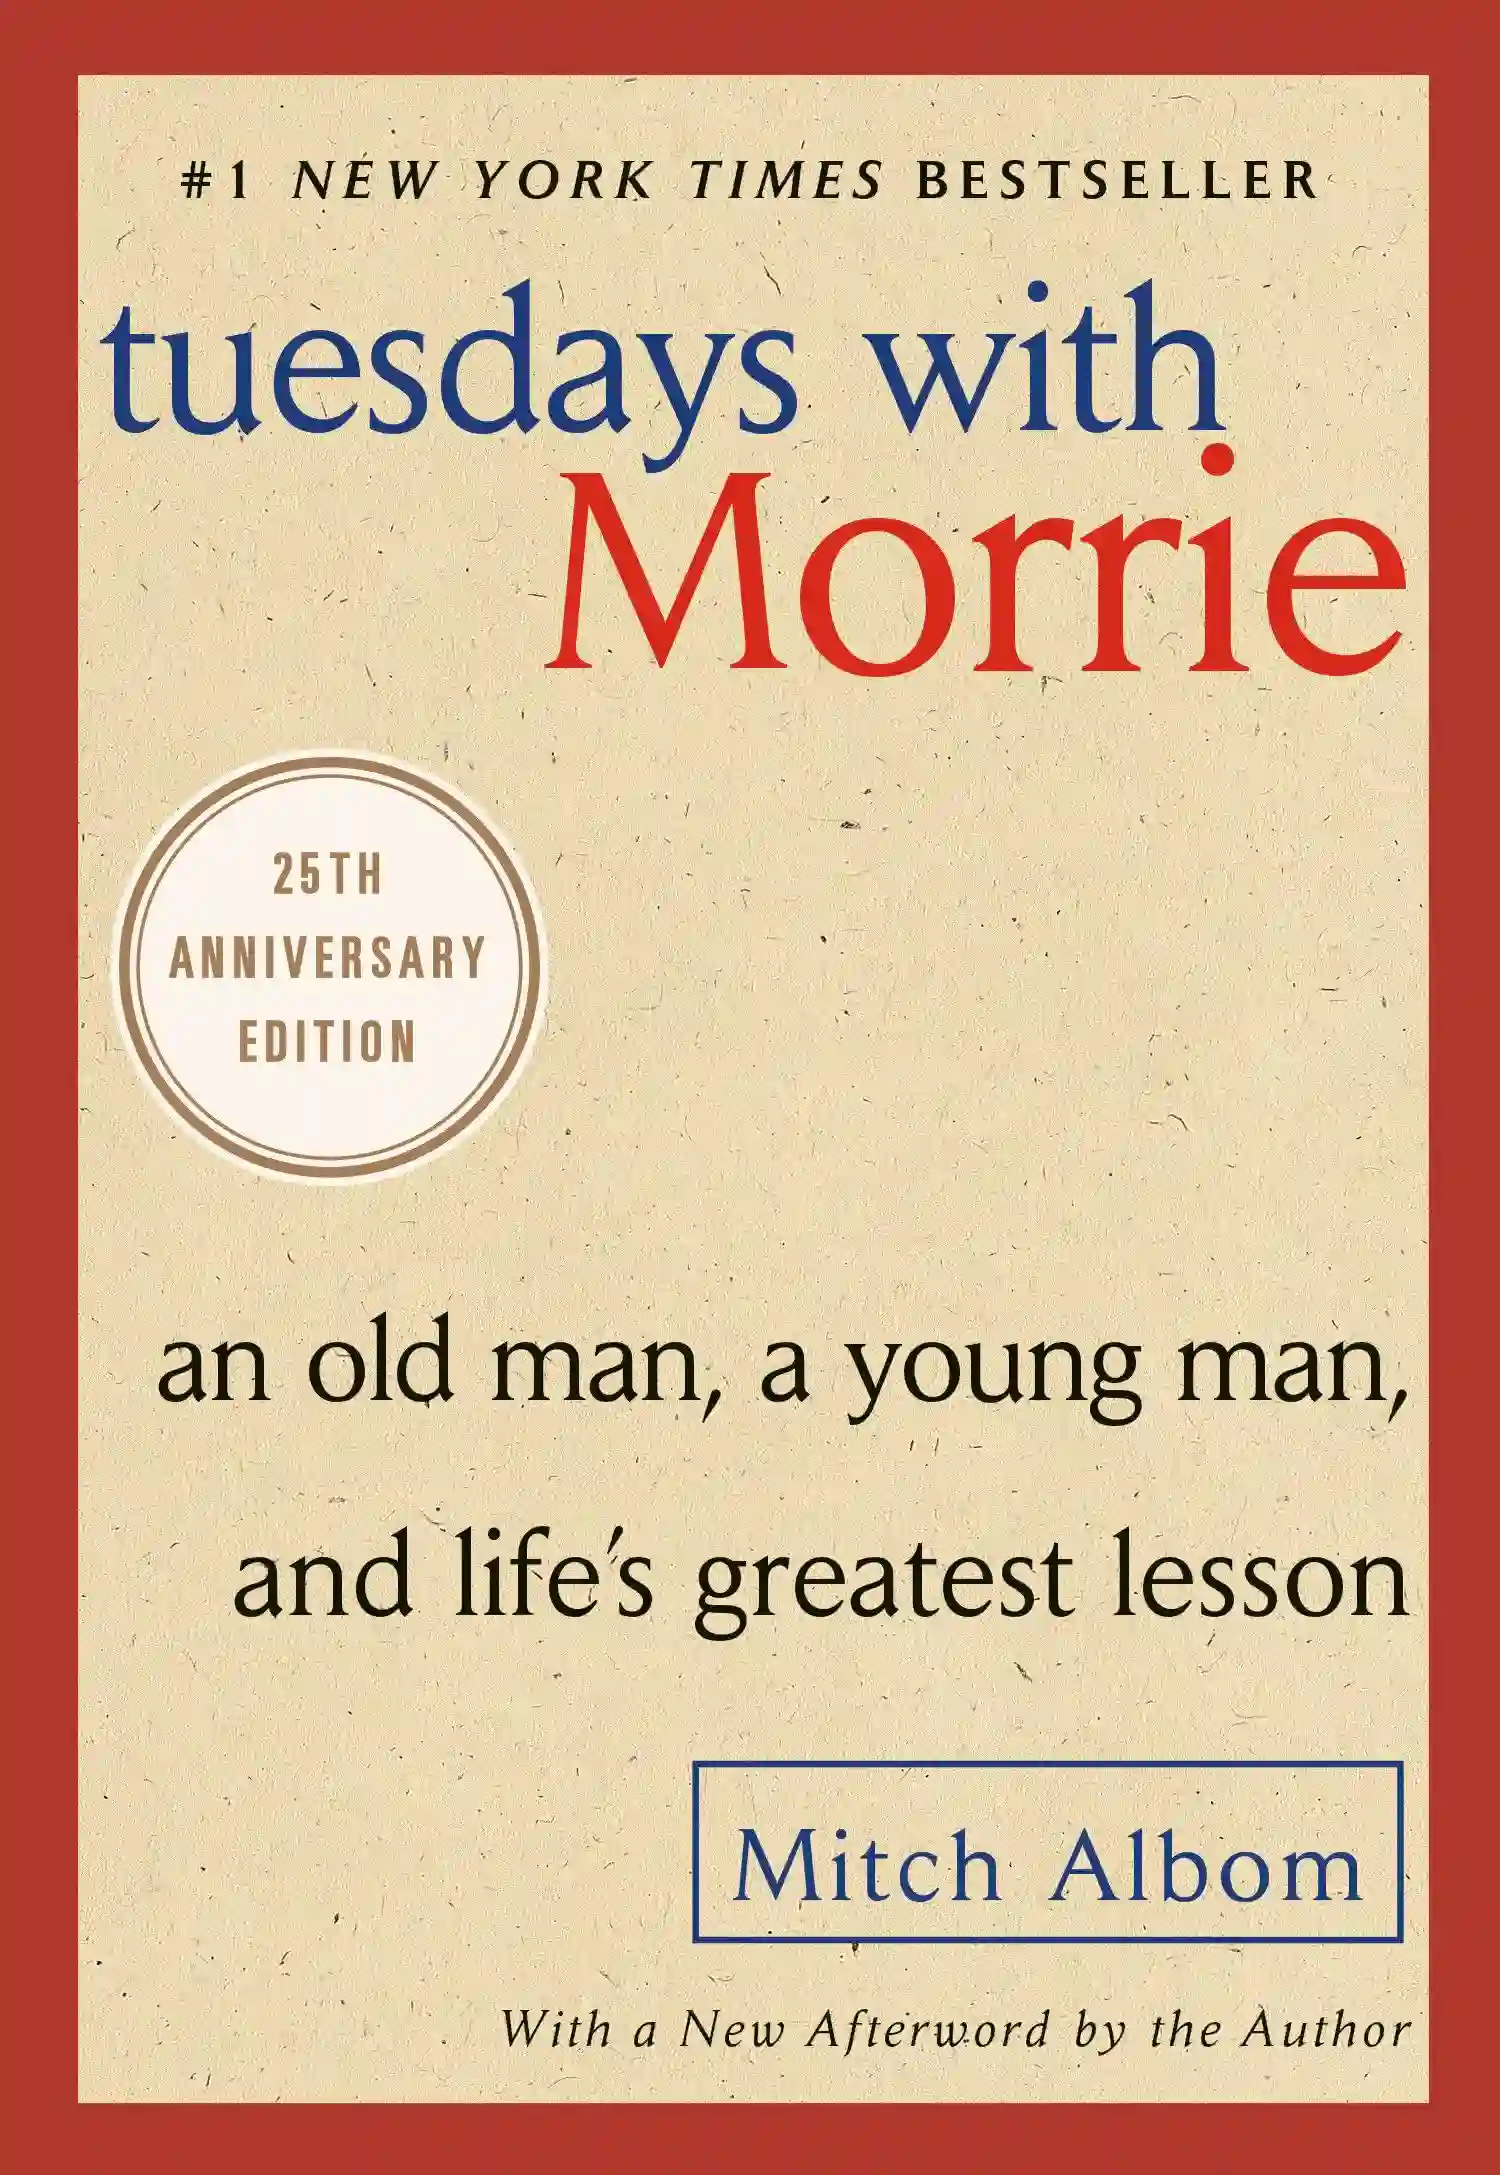 Maybe it was a grandparent, or a teacher or a colleague. Someone older, patient and wise, who understood you when you were young and searching, and gave you sound advice to help you make your way through it. For Mitch Albom, that person was Morrie Schwartz, his college professor from nearly twenty years ago.